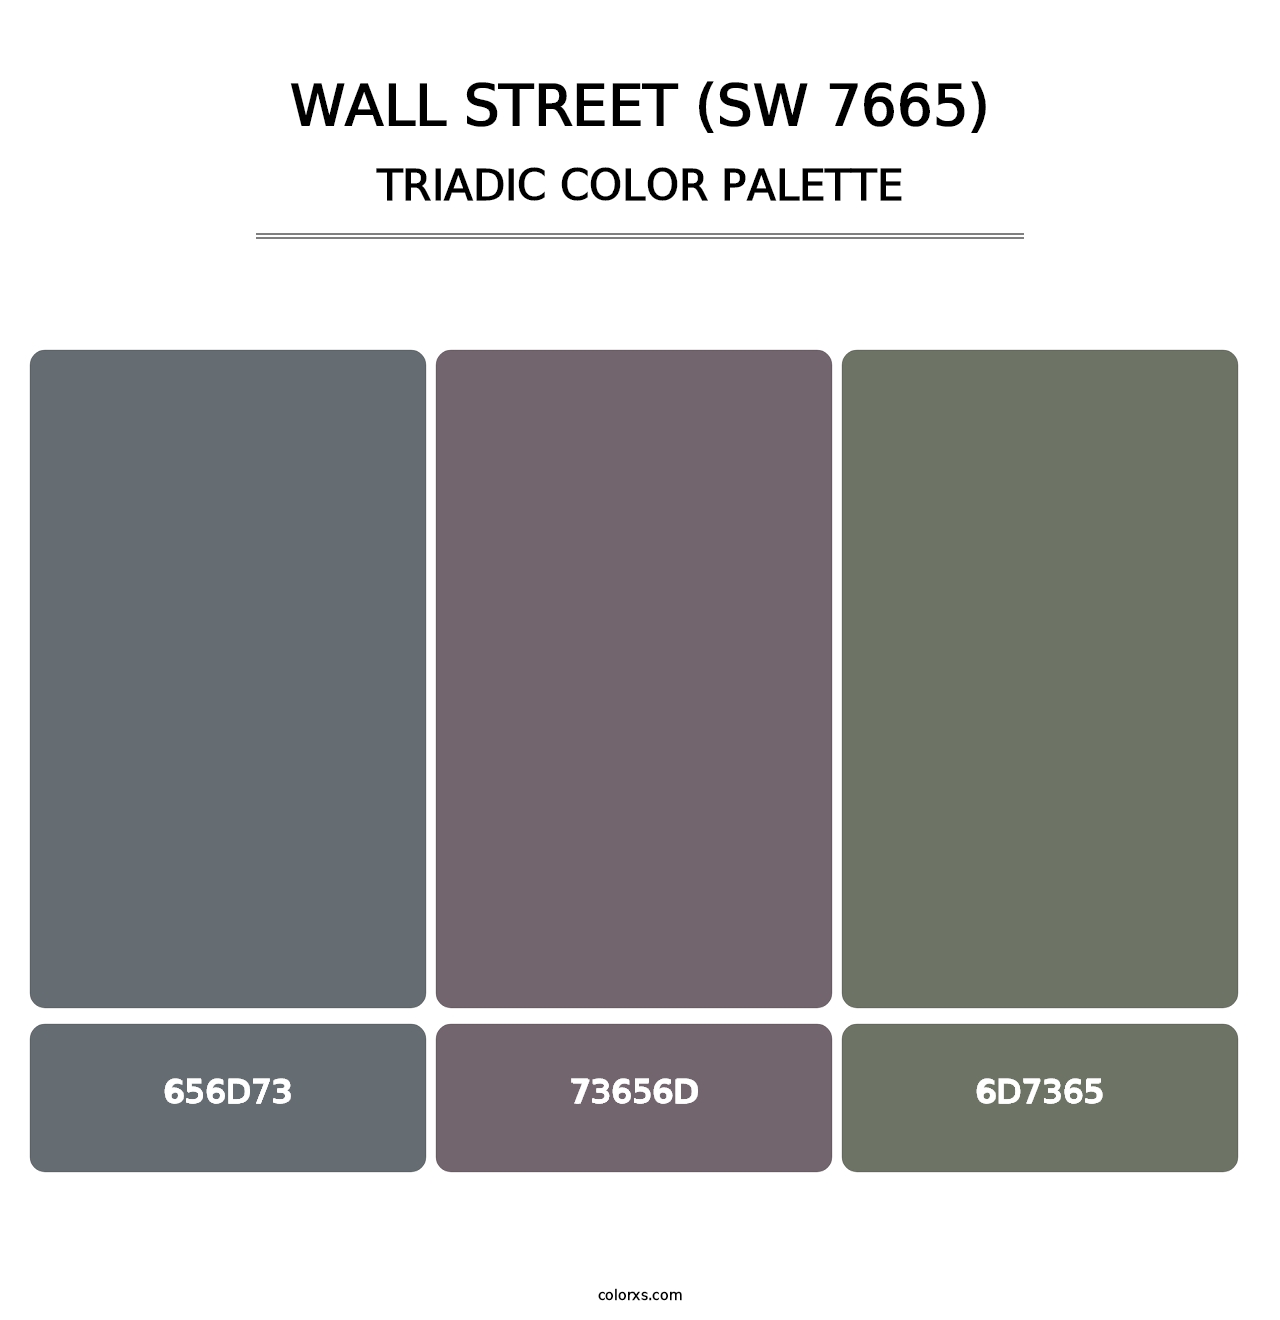 Wall Street (SW 7665) - Triadic Color Palette